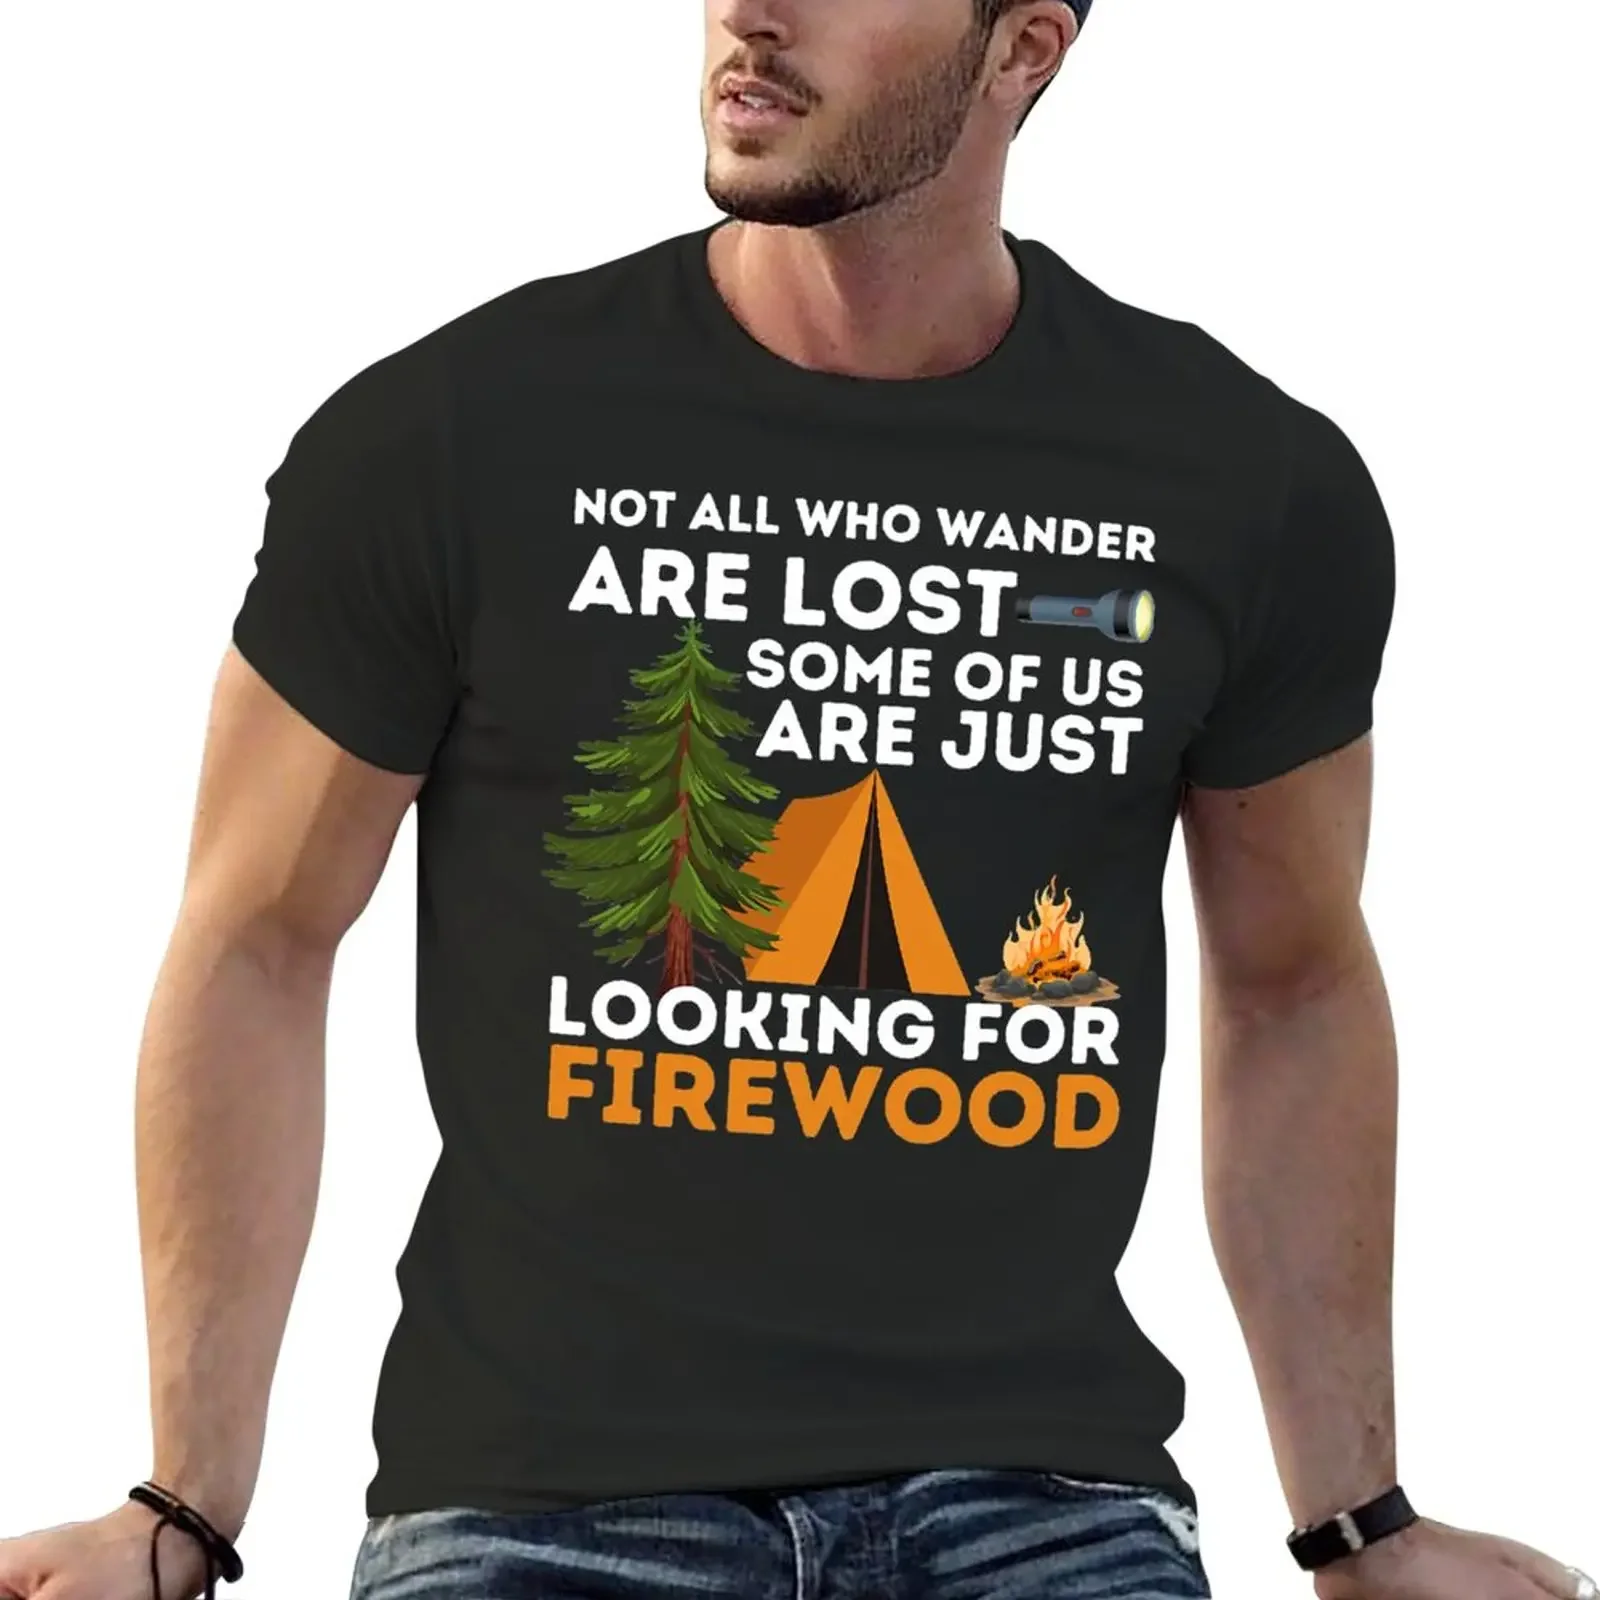 

Not All Those Who Wander Are Lost - Funny Camping Outdoor T-Shirt heavyweights blanks cute tops sweat shirts, men